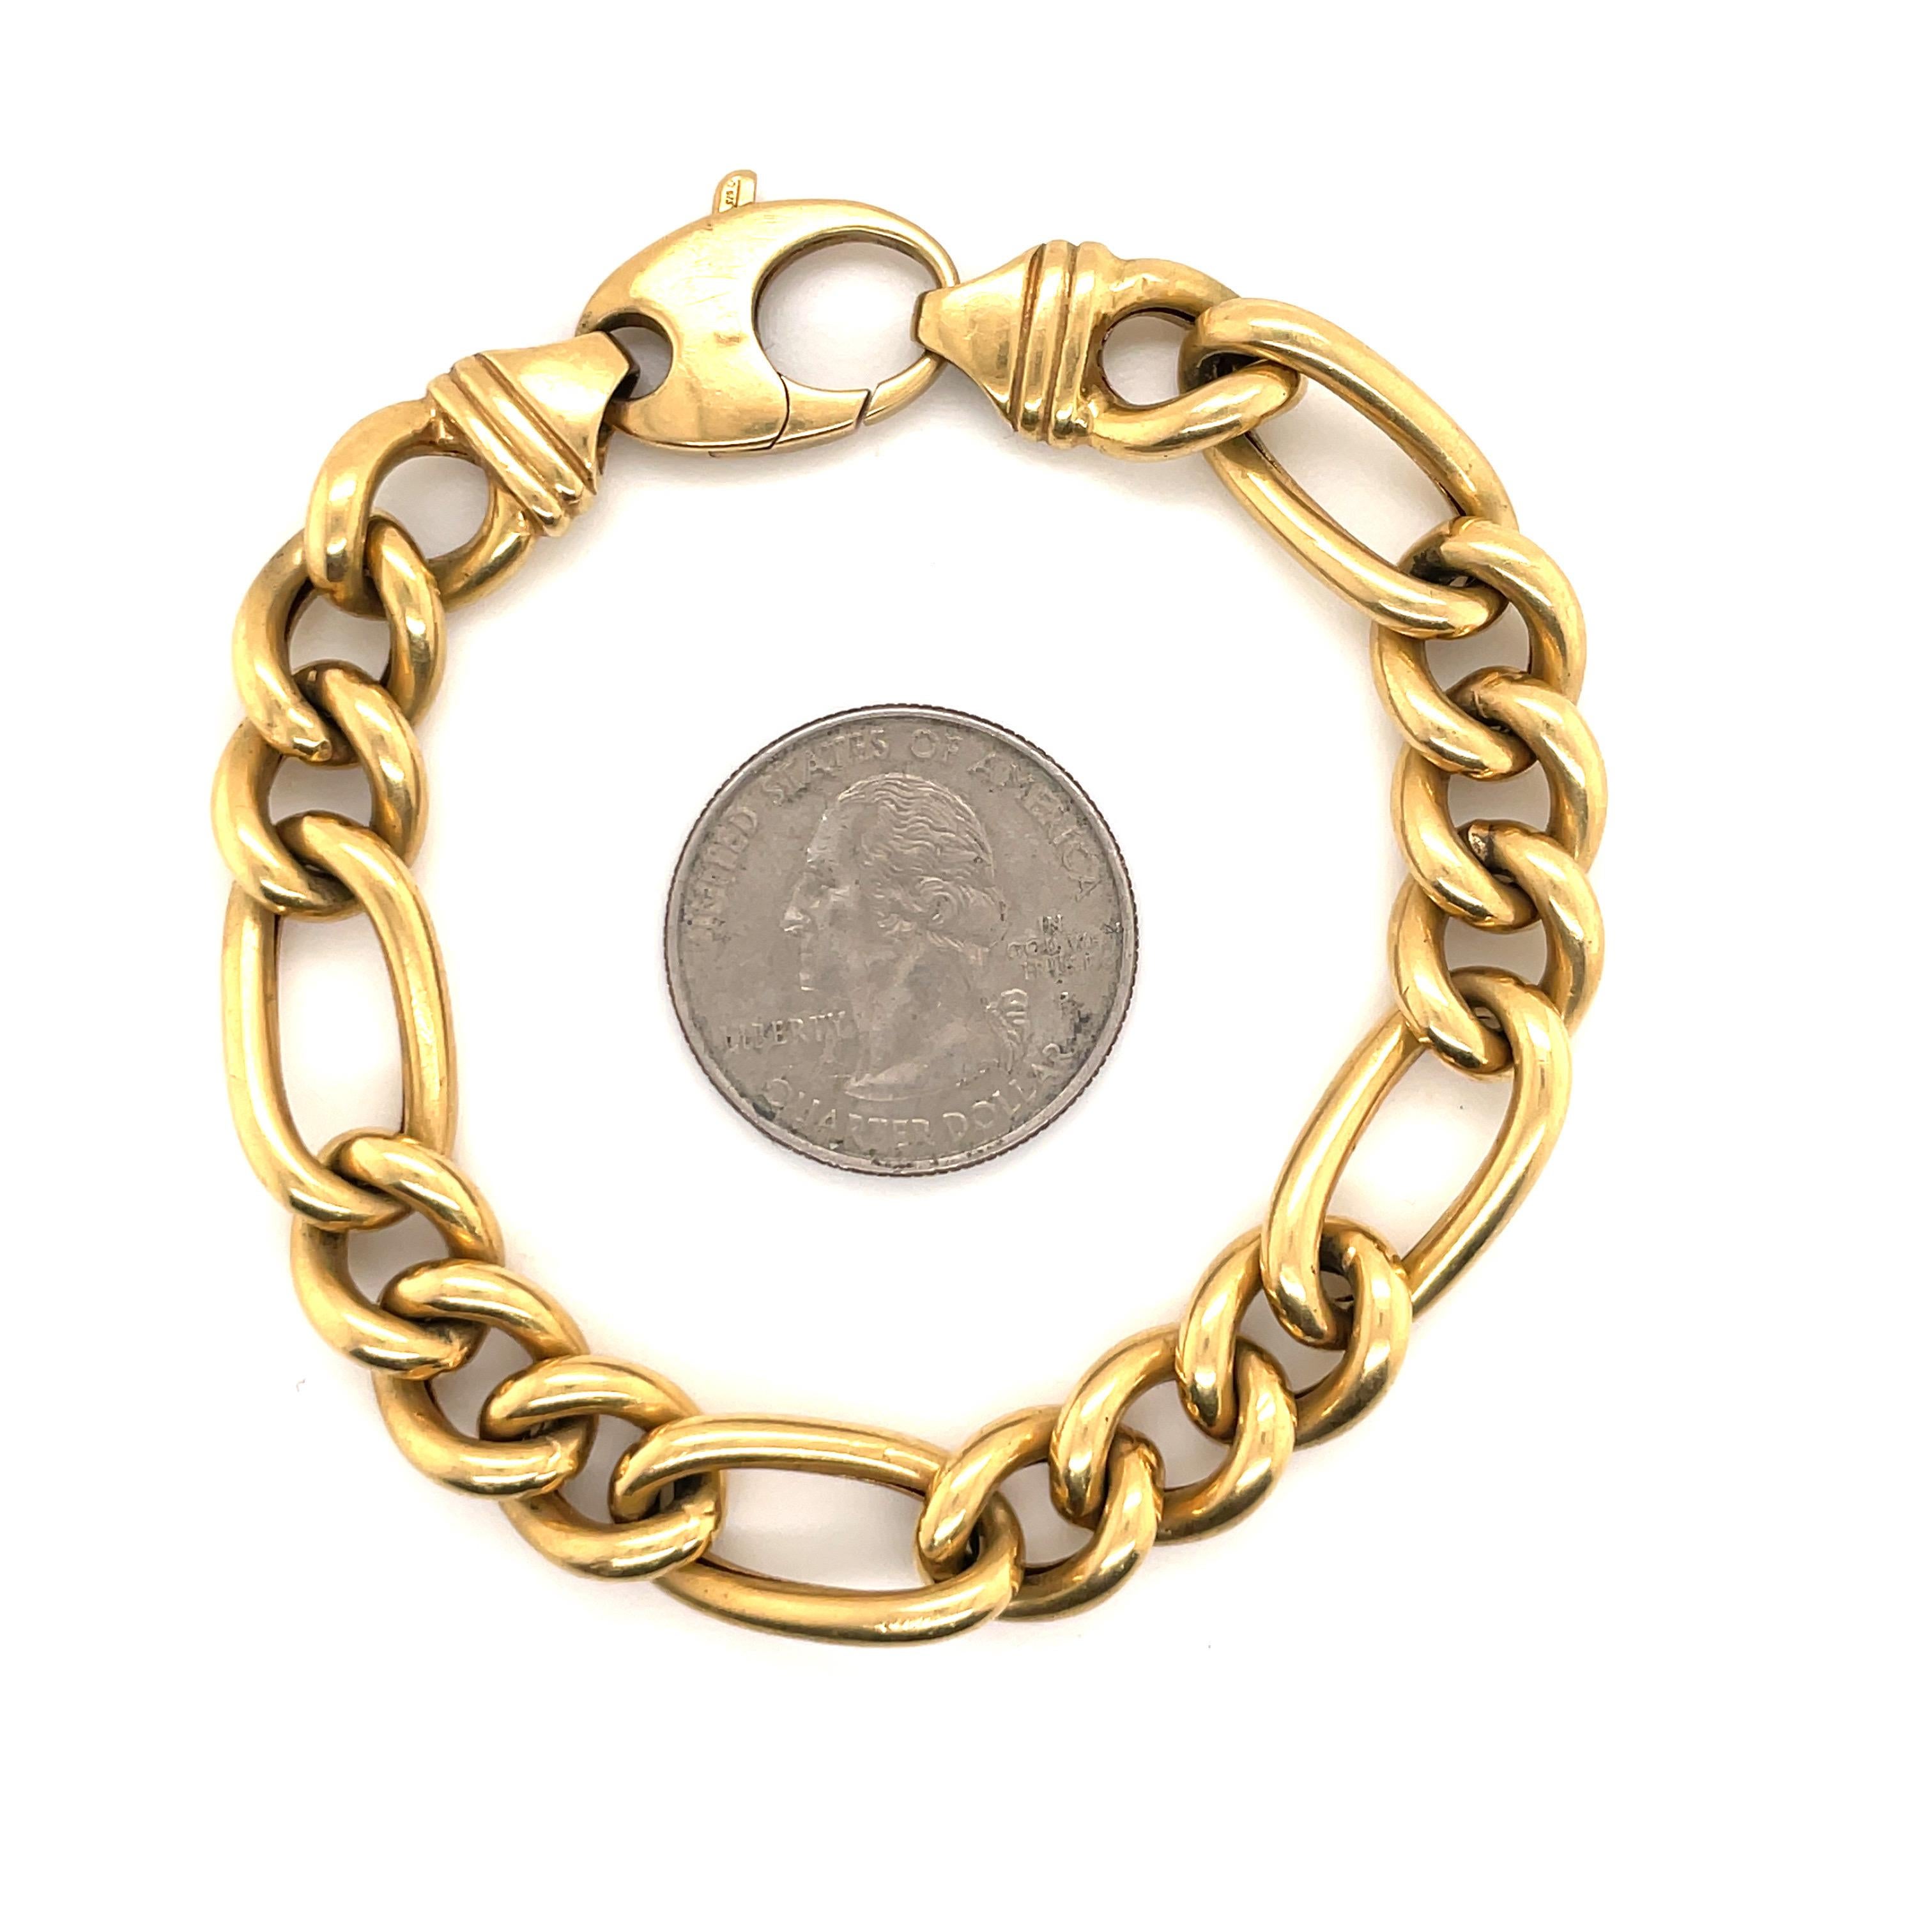 18 Karat Yellow Gold bracelet featuring a Figaro link weighing 27.1 grams. 
Great to layer or wear alone!